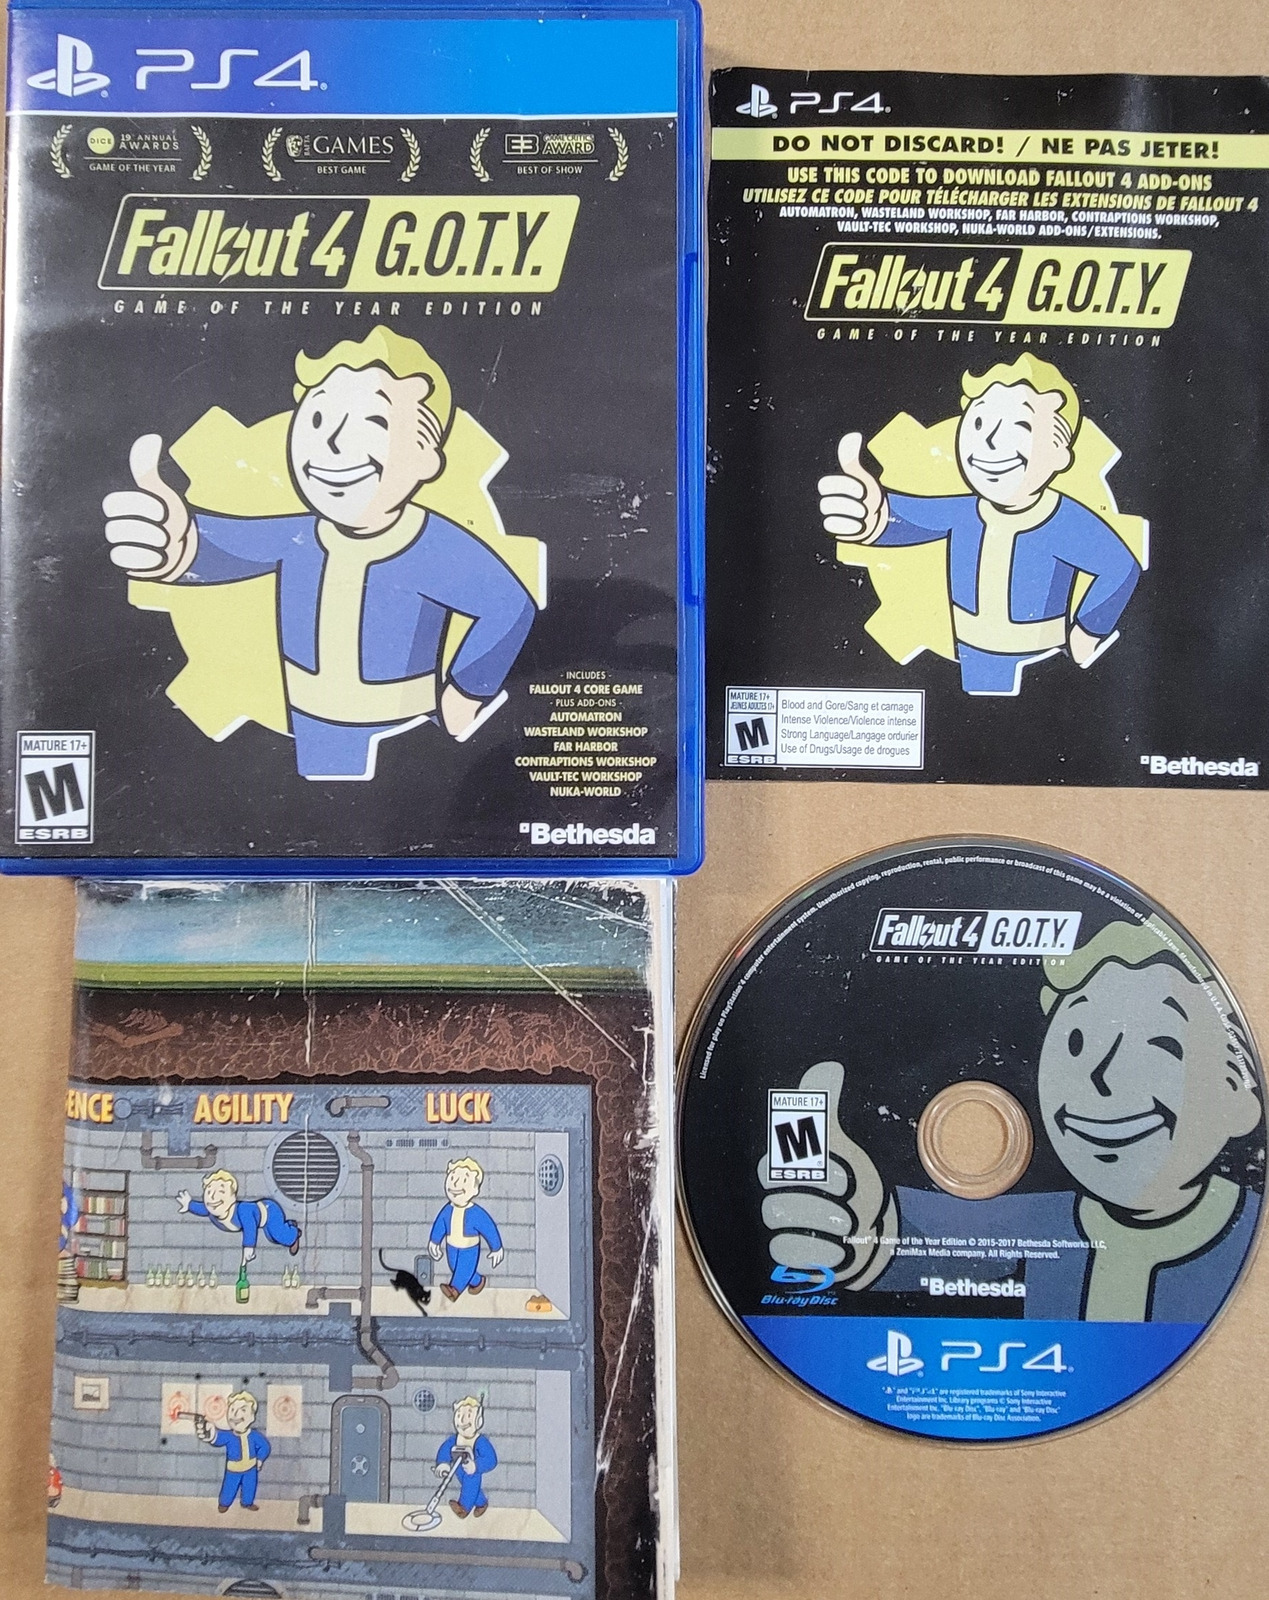 Fallout 4 Game Of The Year G.O.T.Y. - Playstation 4 PS4 TESTED includes Poster